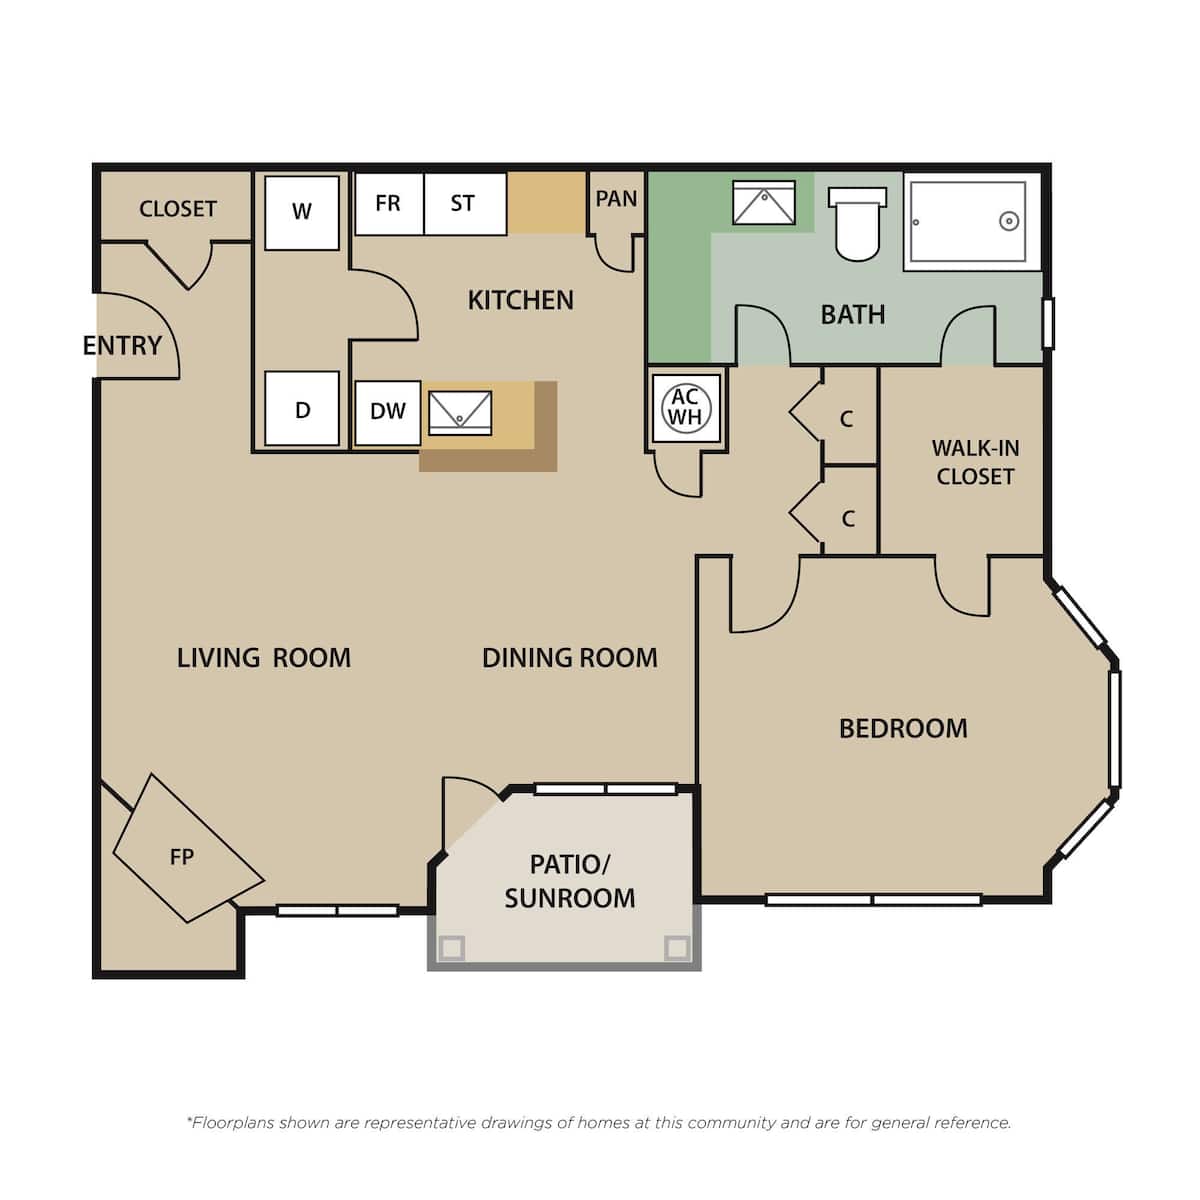 Floorplan diagram for SQUARE A7, showing 1 bedroom